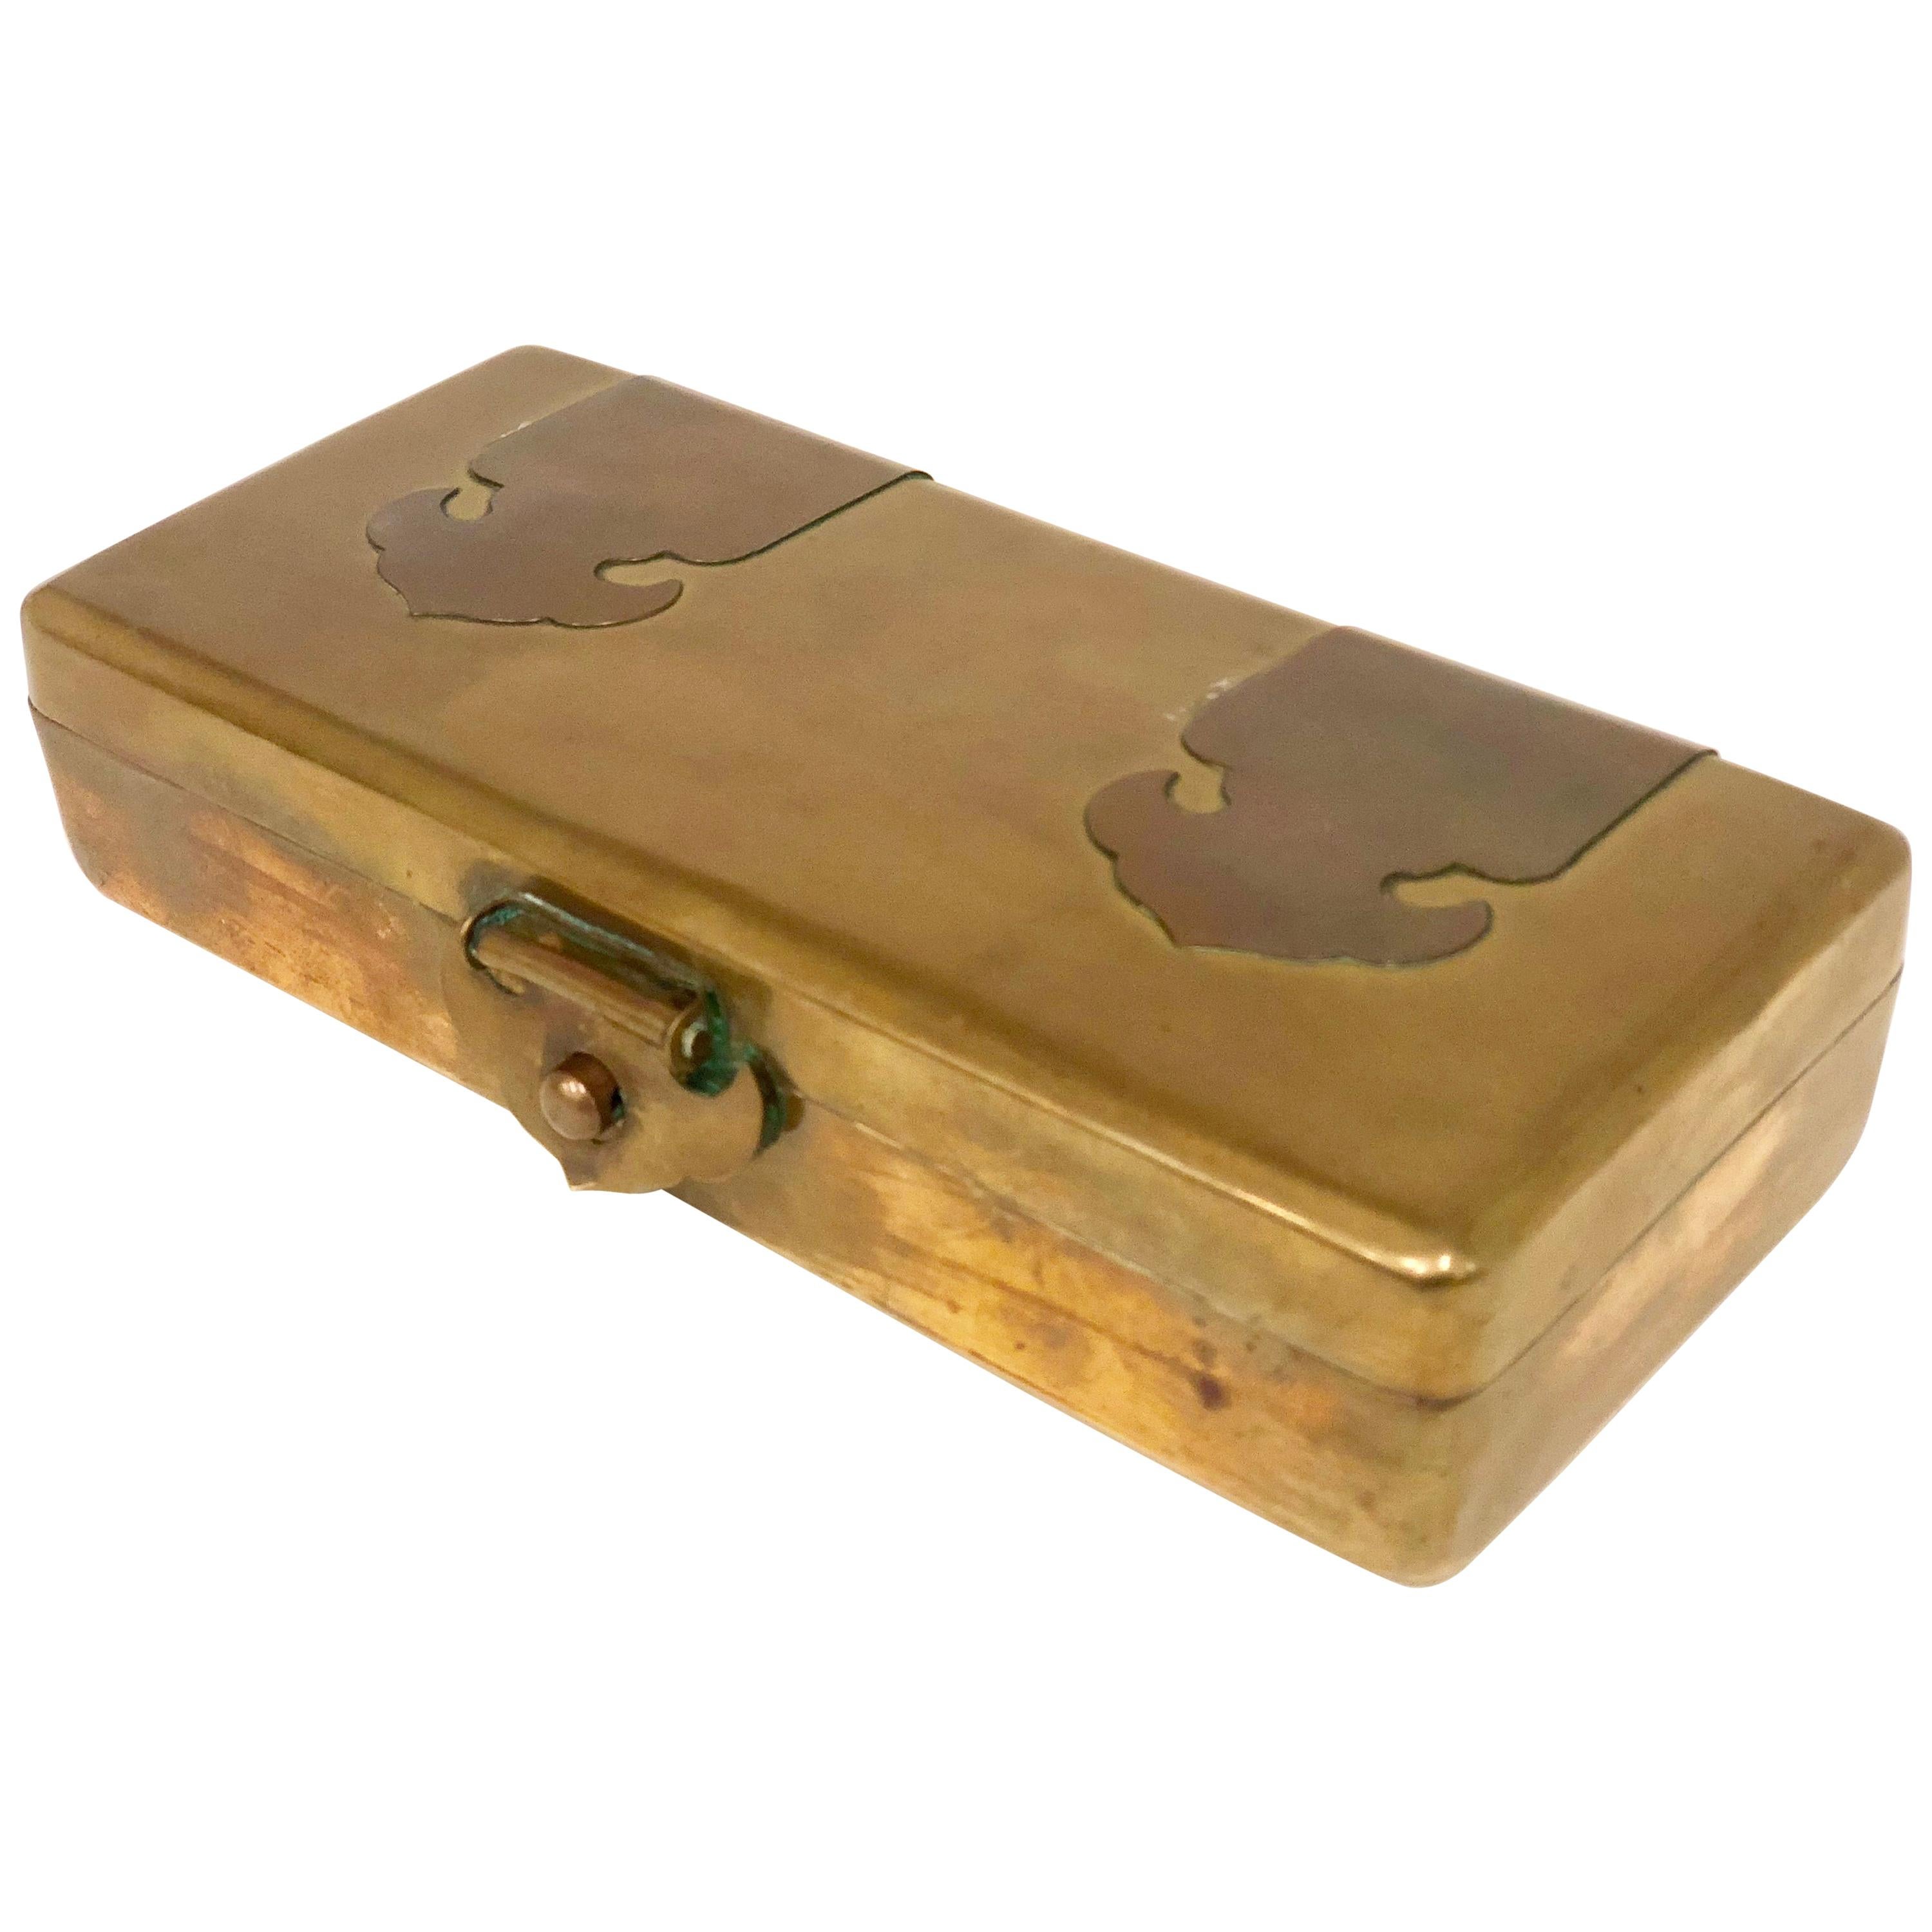 Hollywood Regency Patinated Brass and Copper Jewelry Box Made in Hong Kong